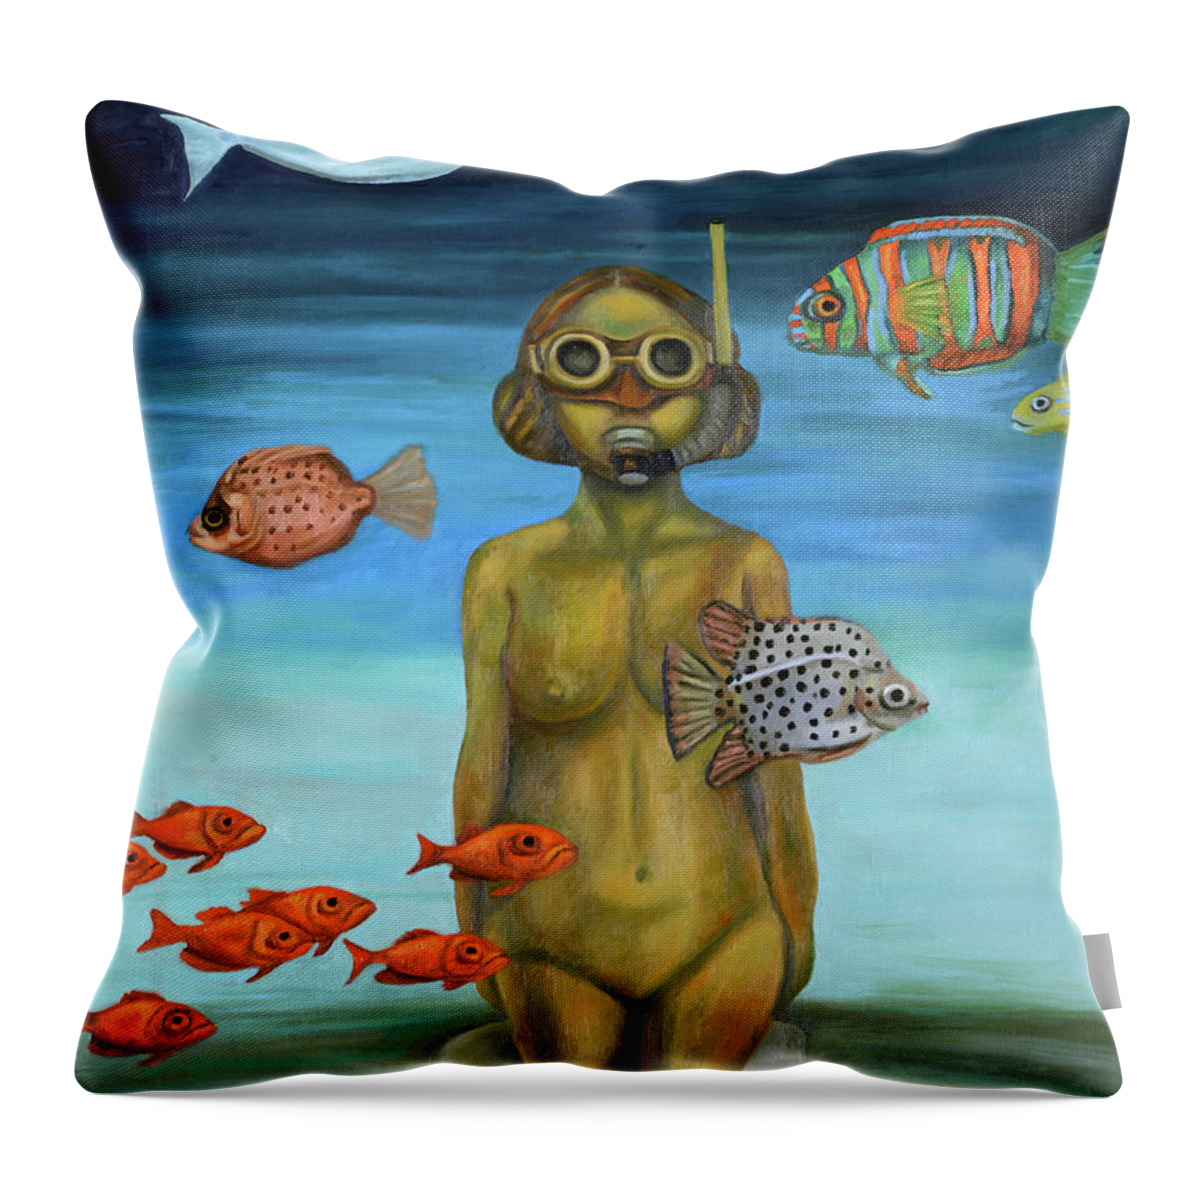 Gas Mask Throw Pillow featuring the painting Just Breathe by Leah Saulnier The Painting Maniac